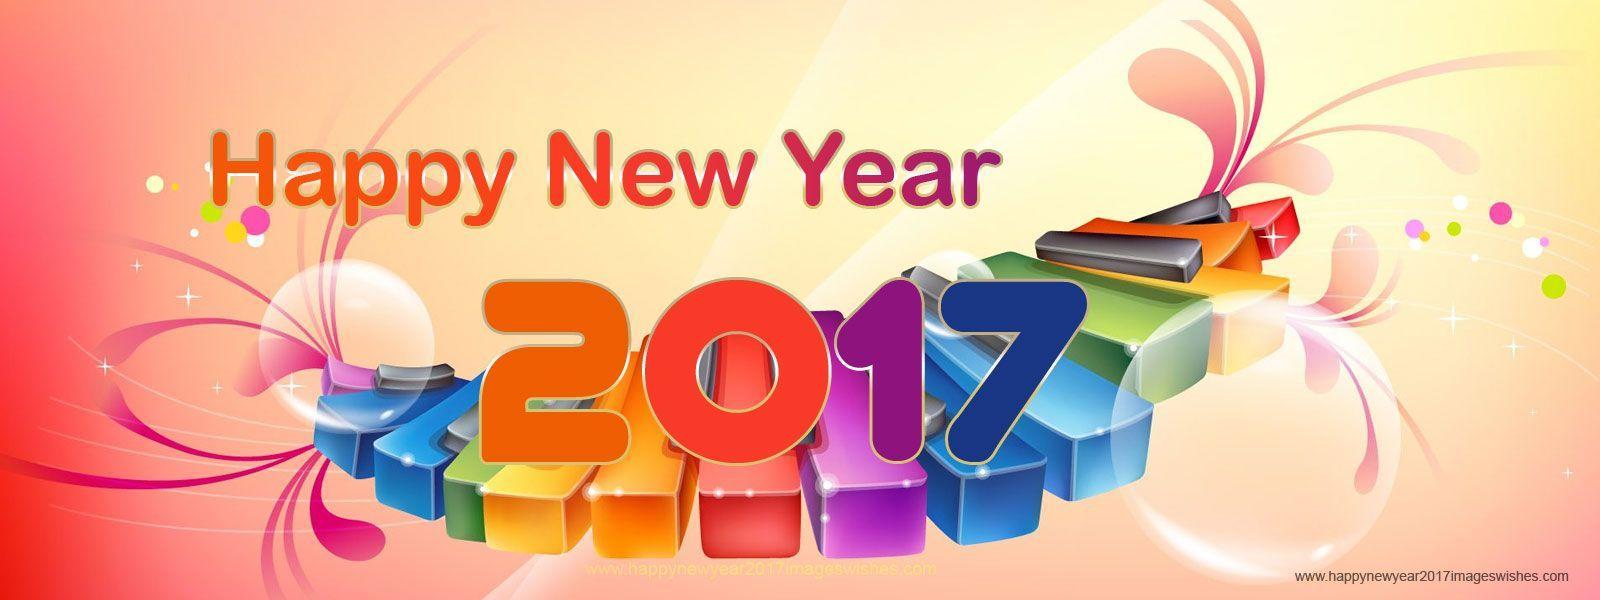 Happy New Year HD Picture and Wallpaper 2017 Free Downlaod